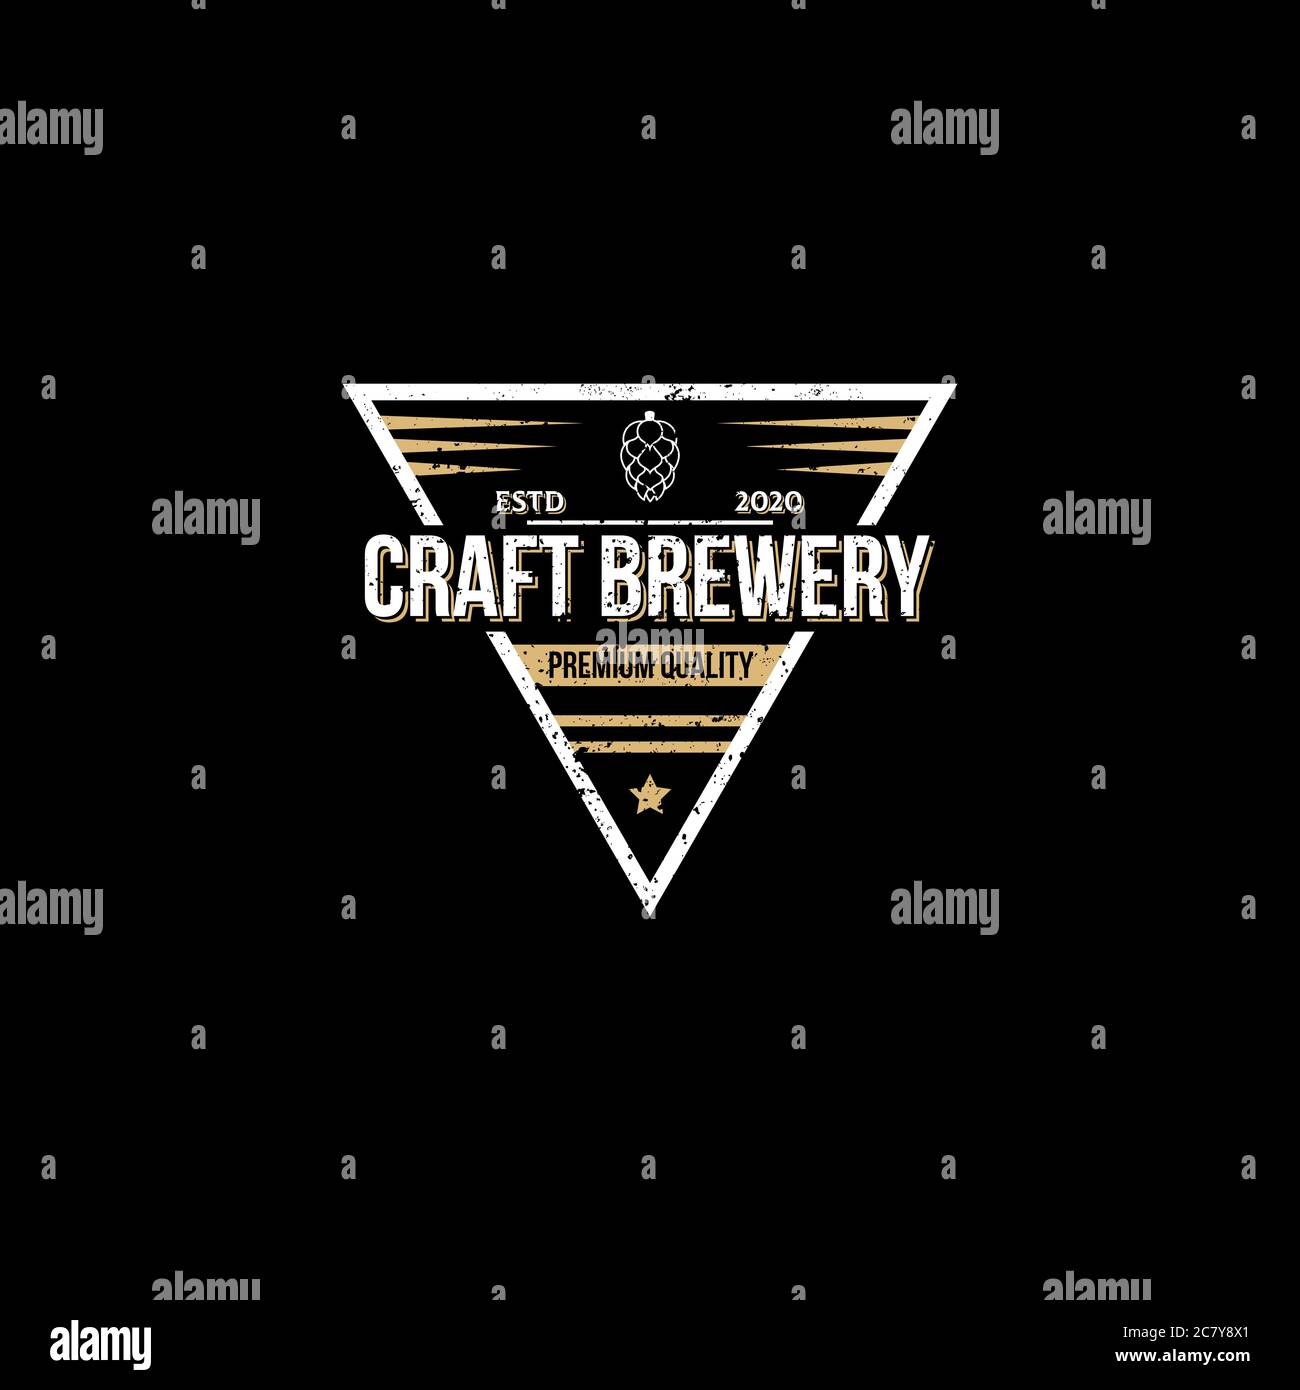 Triangle shape craft brewery logo design vector, best for brew house, bar, pub, brewing company branding and identity Stock Vector